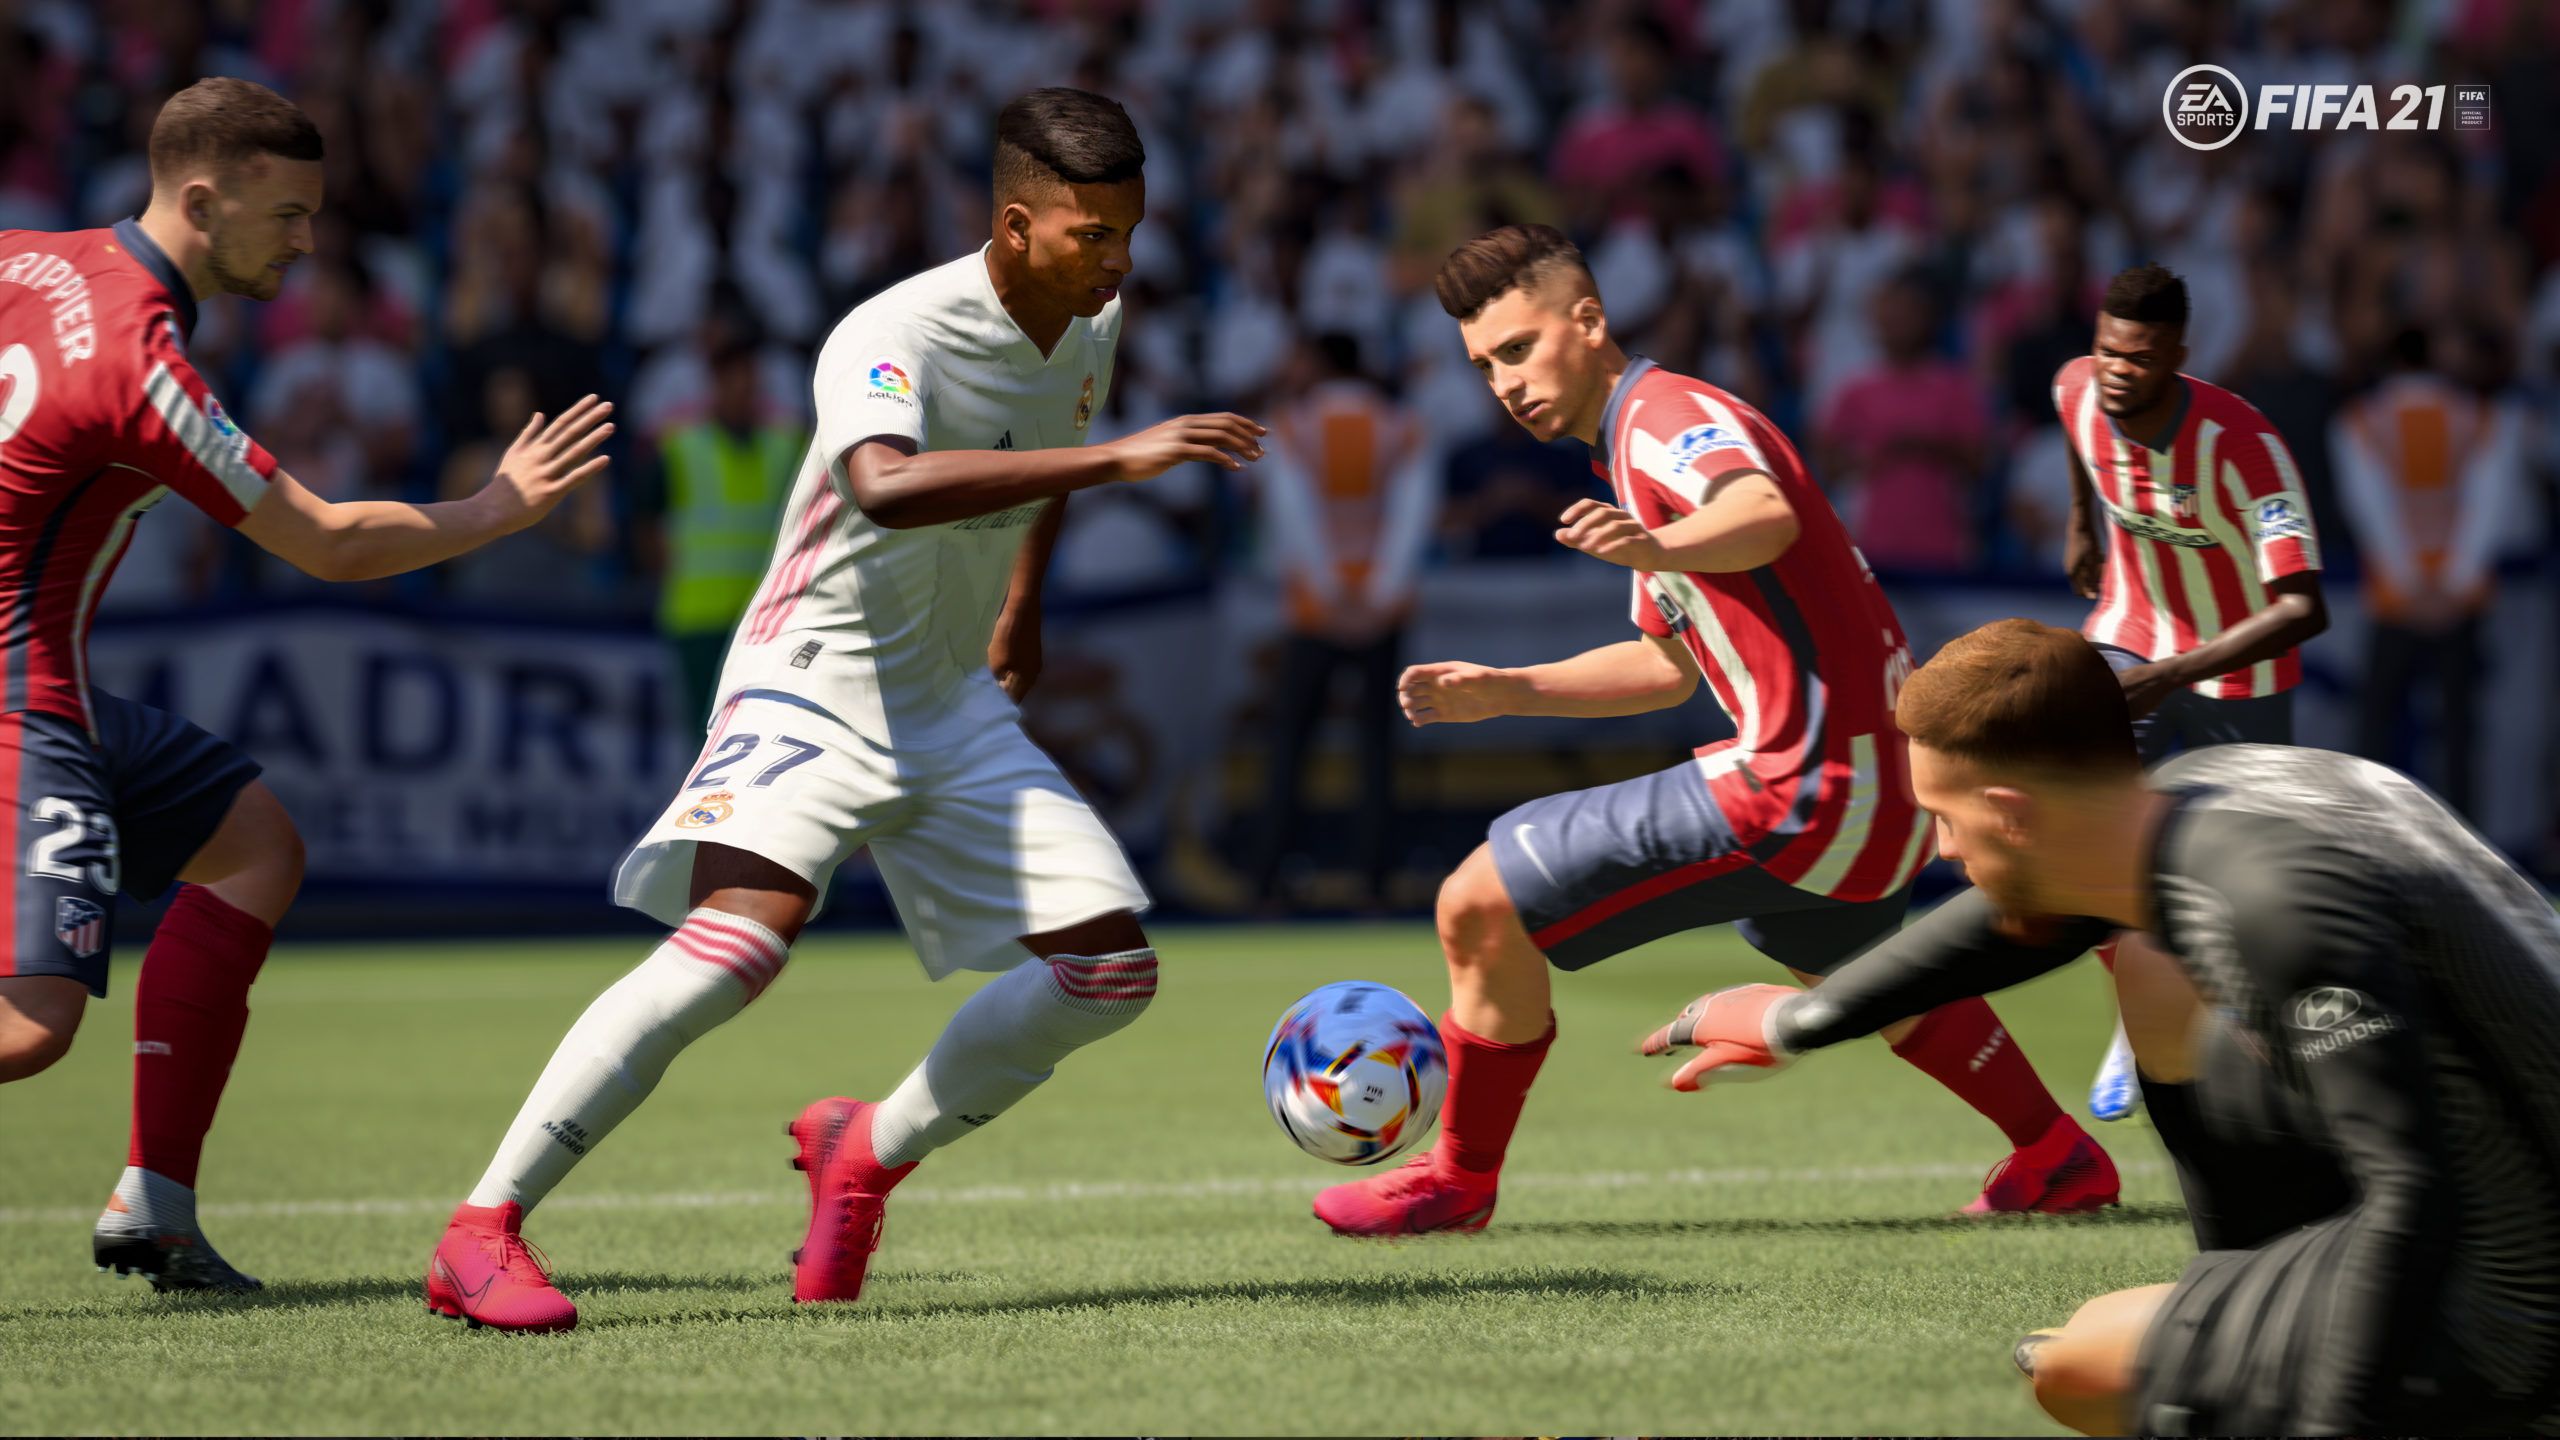 FIFA 21 Hands On Gameplay Preview. SimHeads: Sports Gaming Forums